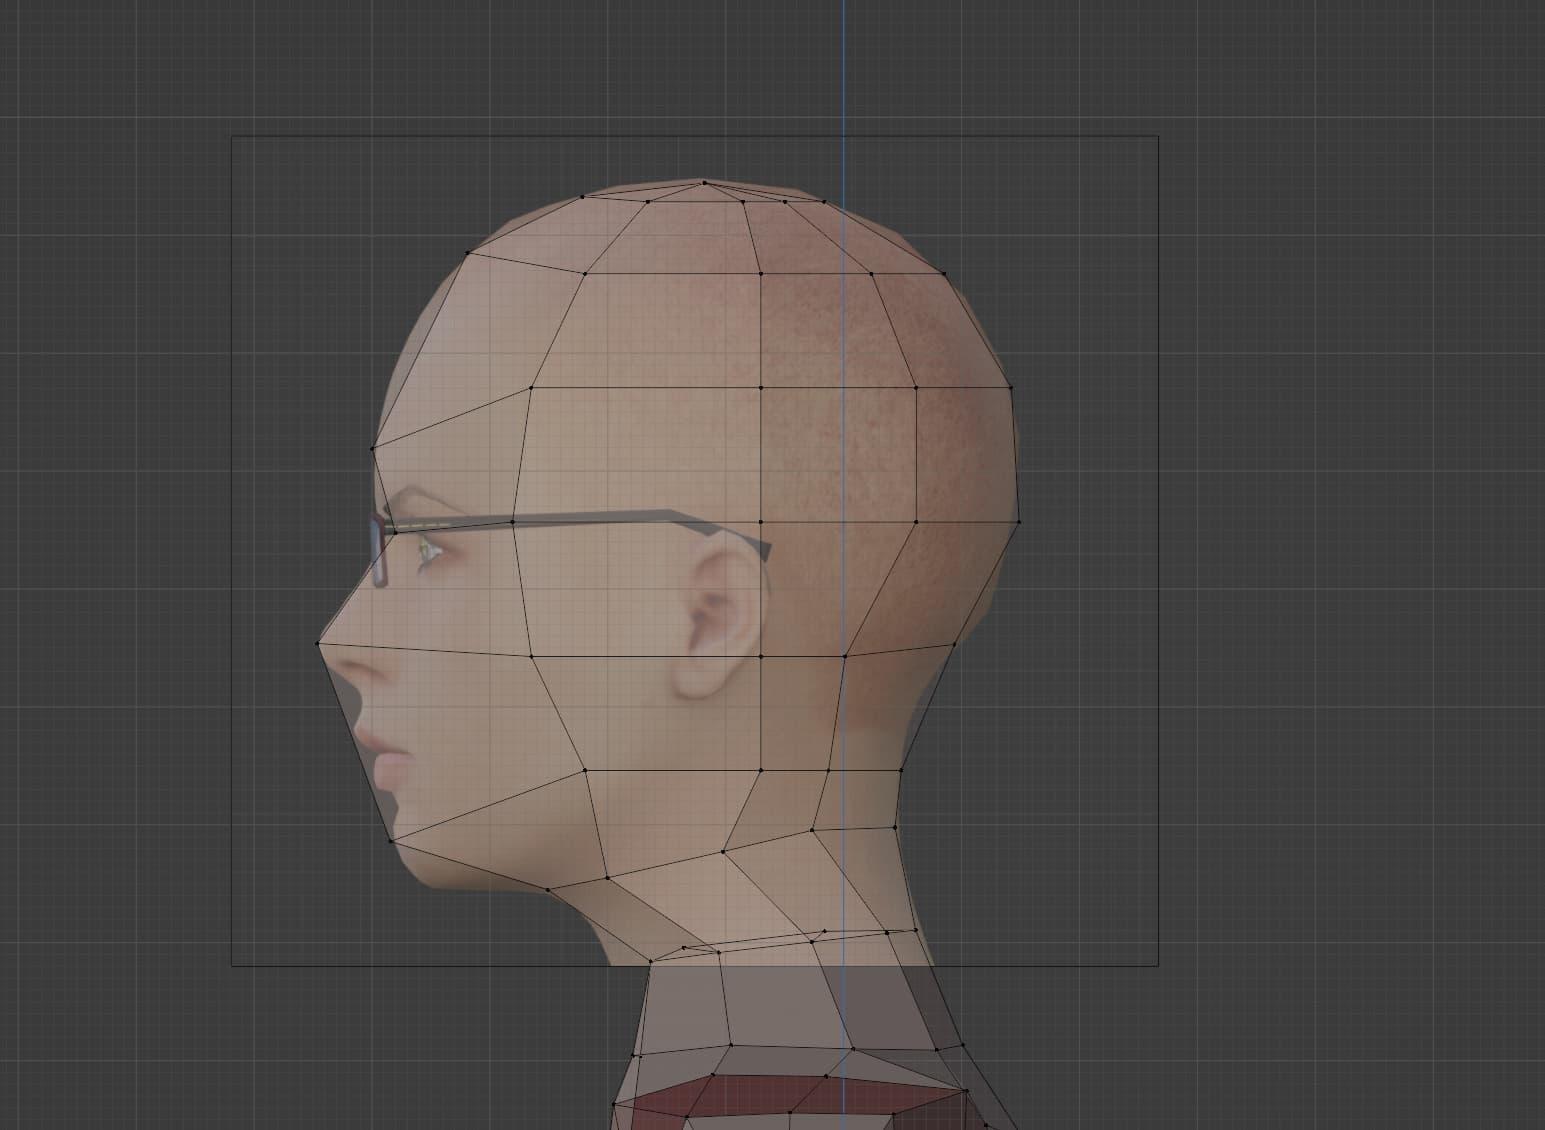 The basic shape of a head has been constructed, using the side profile of a bald female head as a reference image